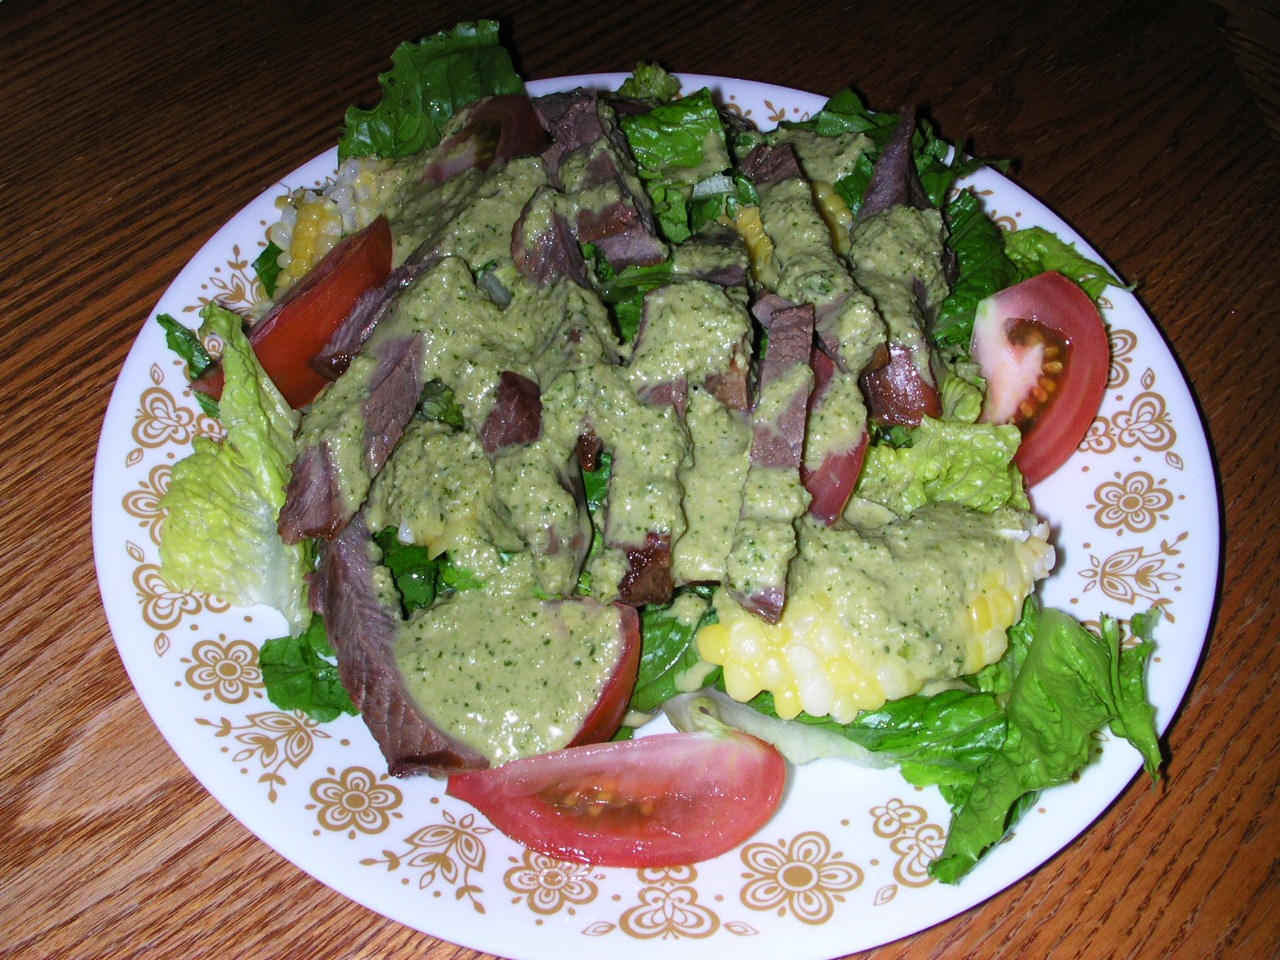 Salad with source